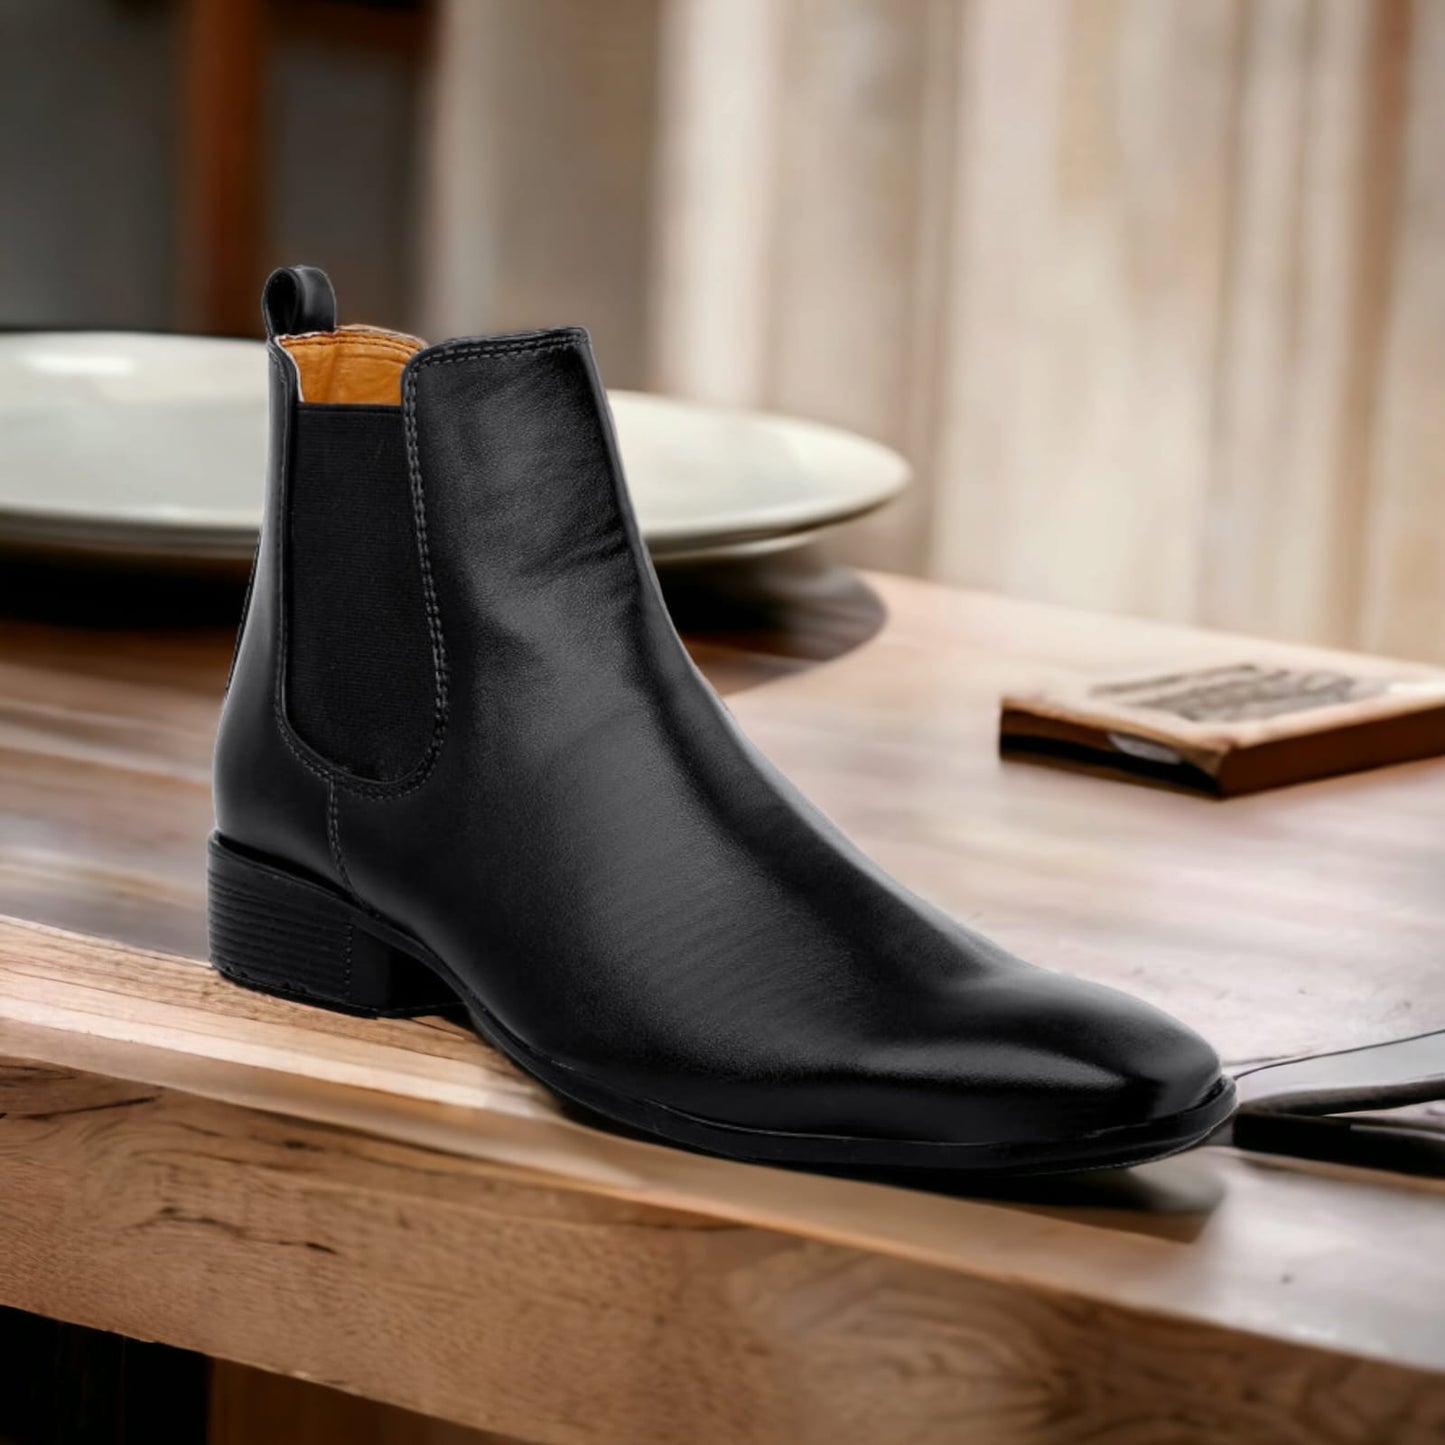 Jack Marc Men's Stylish Black Formal and Casual Wear British Chelsea Ankle Boots